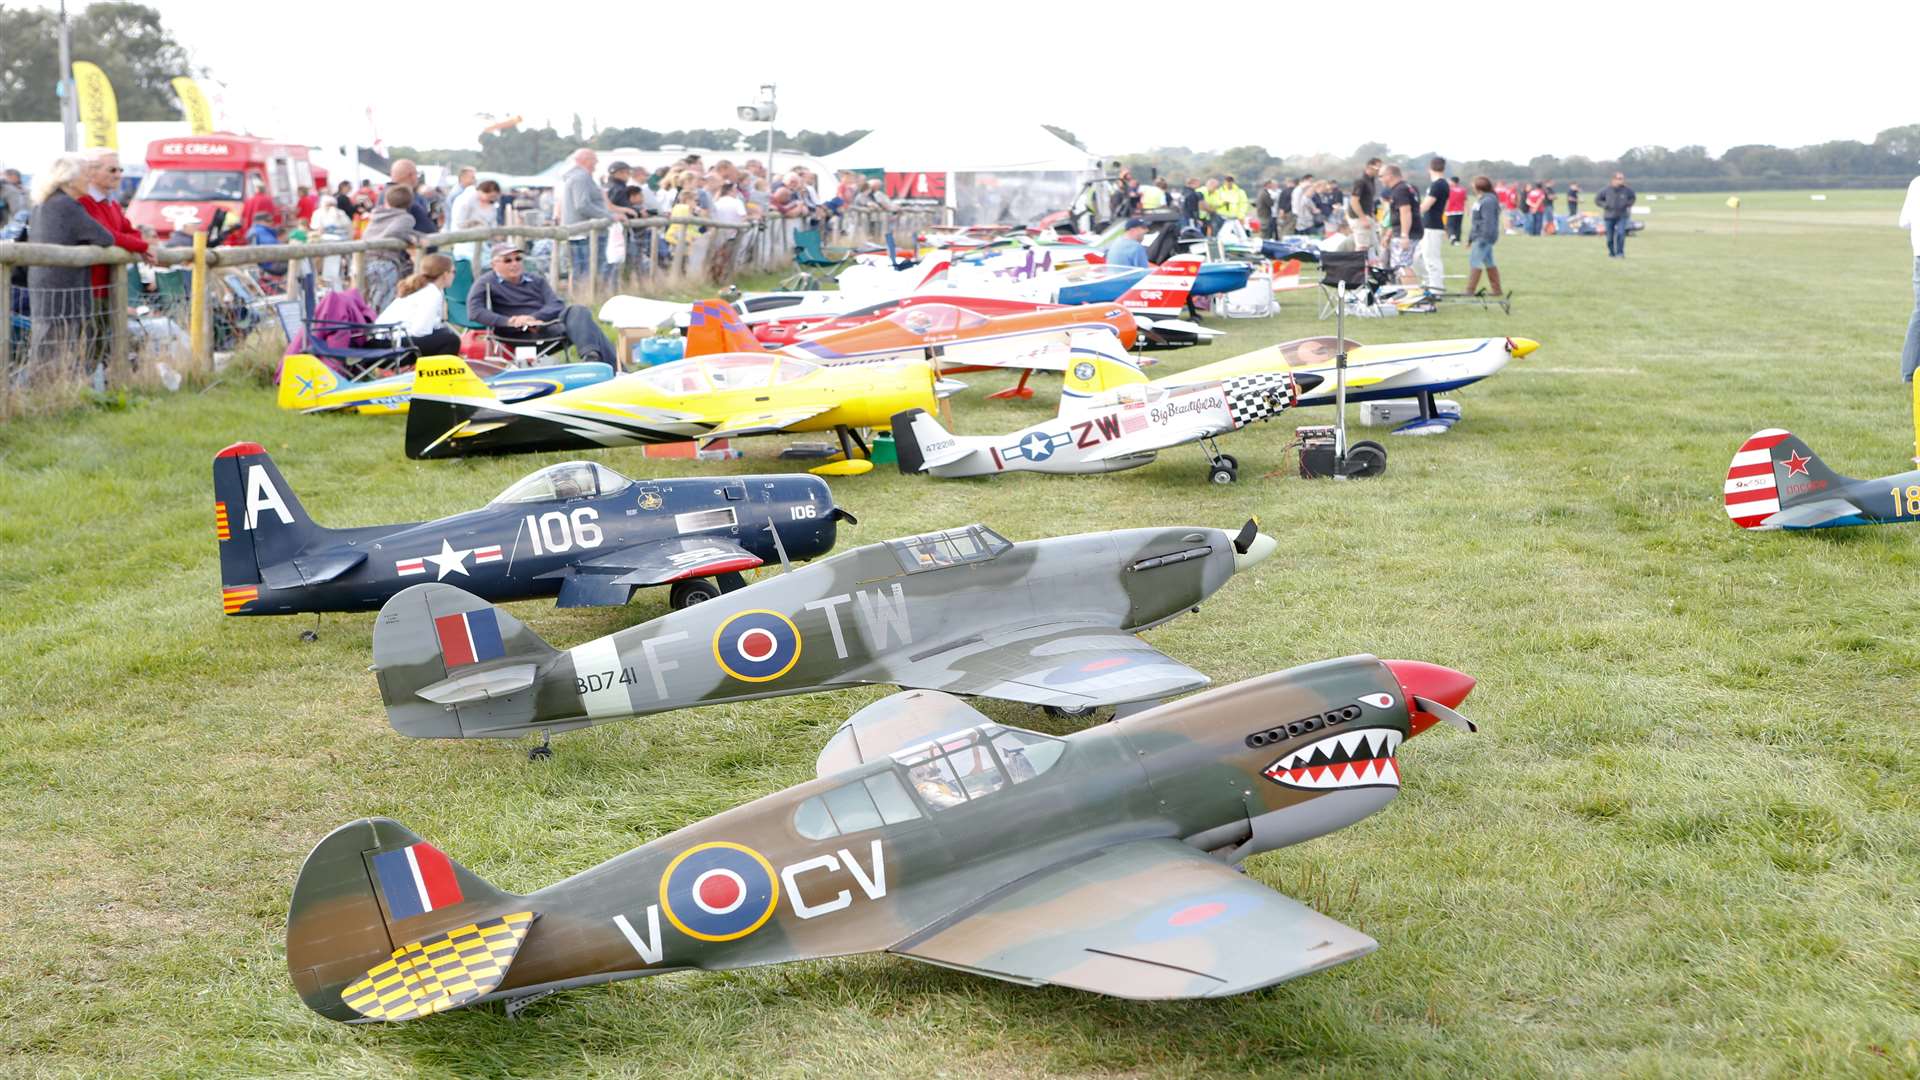 Headcorn Aerodrome is also home to the Southern Model Show Picture: Matthew Walker